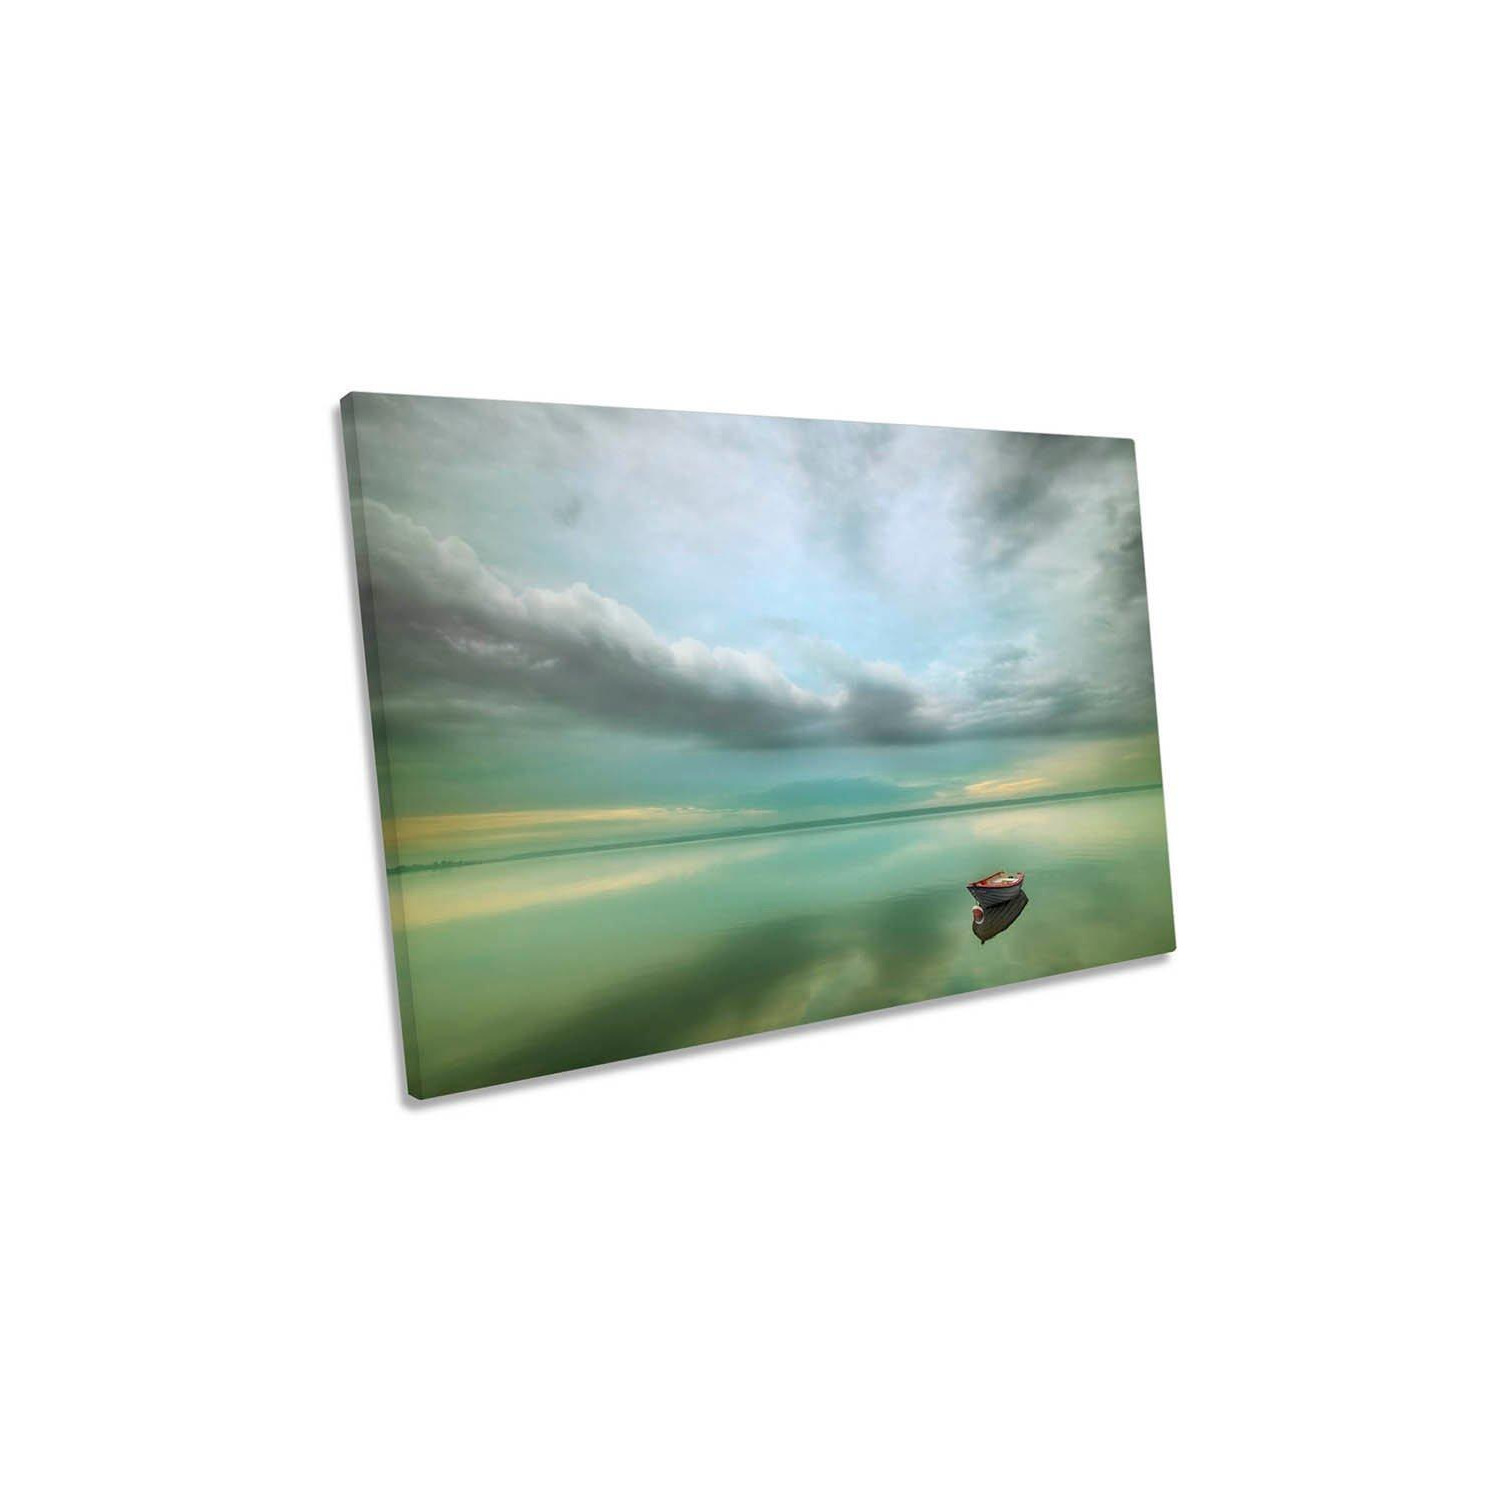 Boat Misty Morning Canvas Wall Art Picture Print - image 1